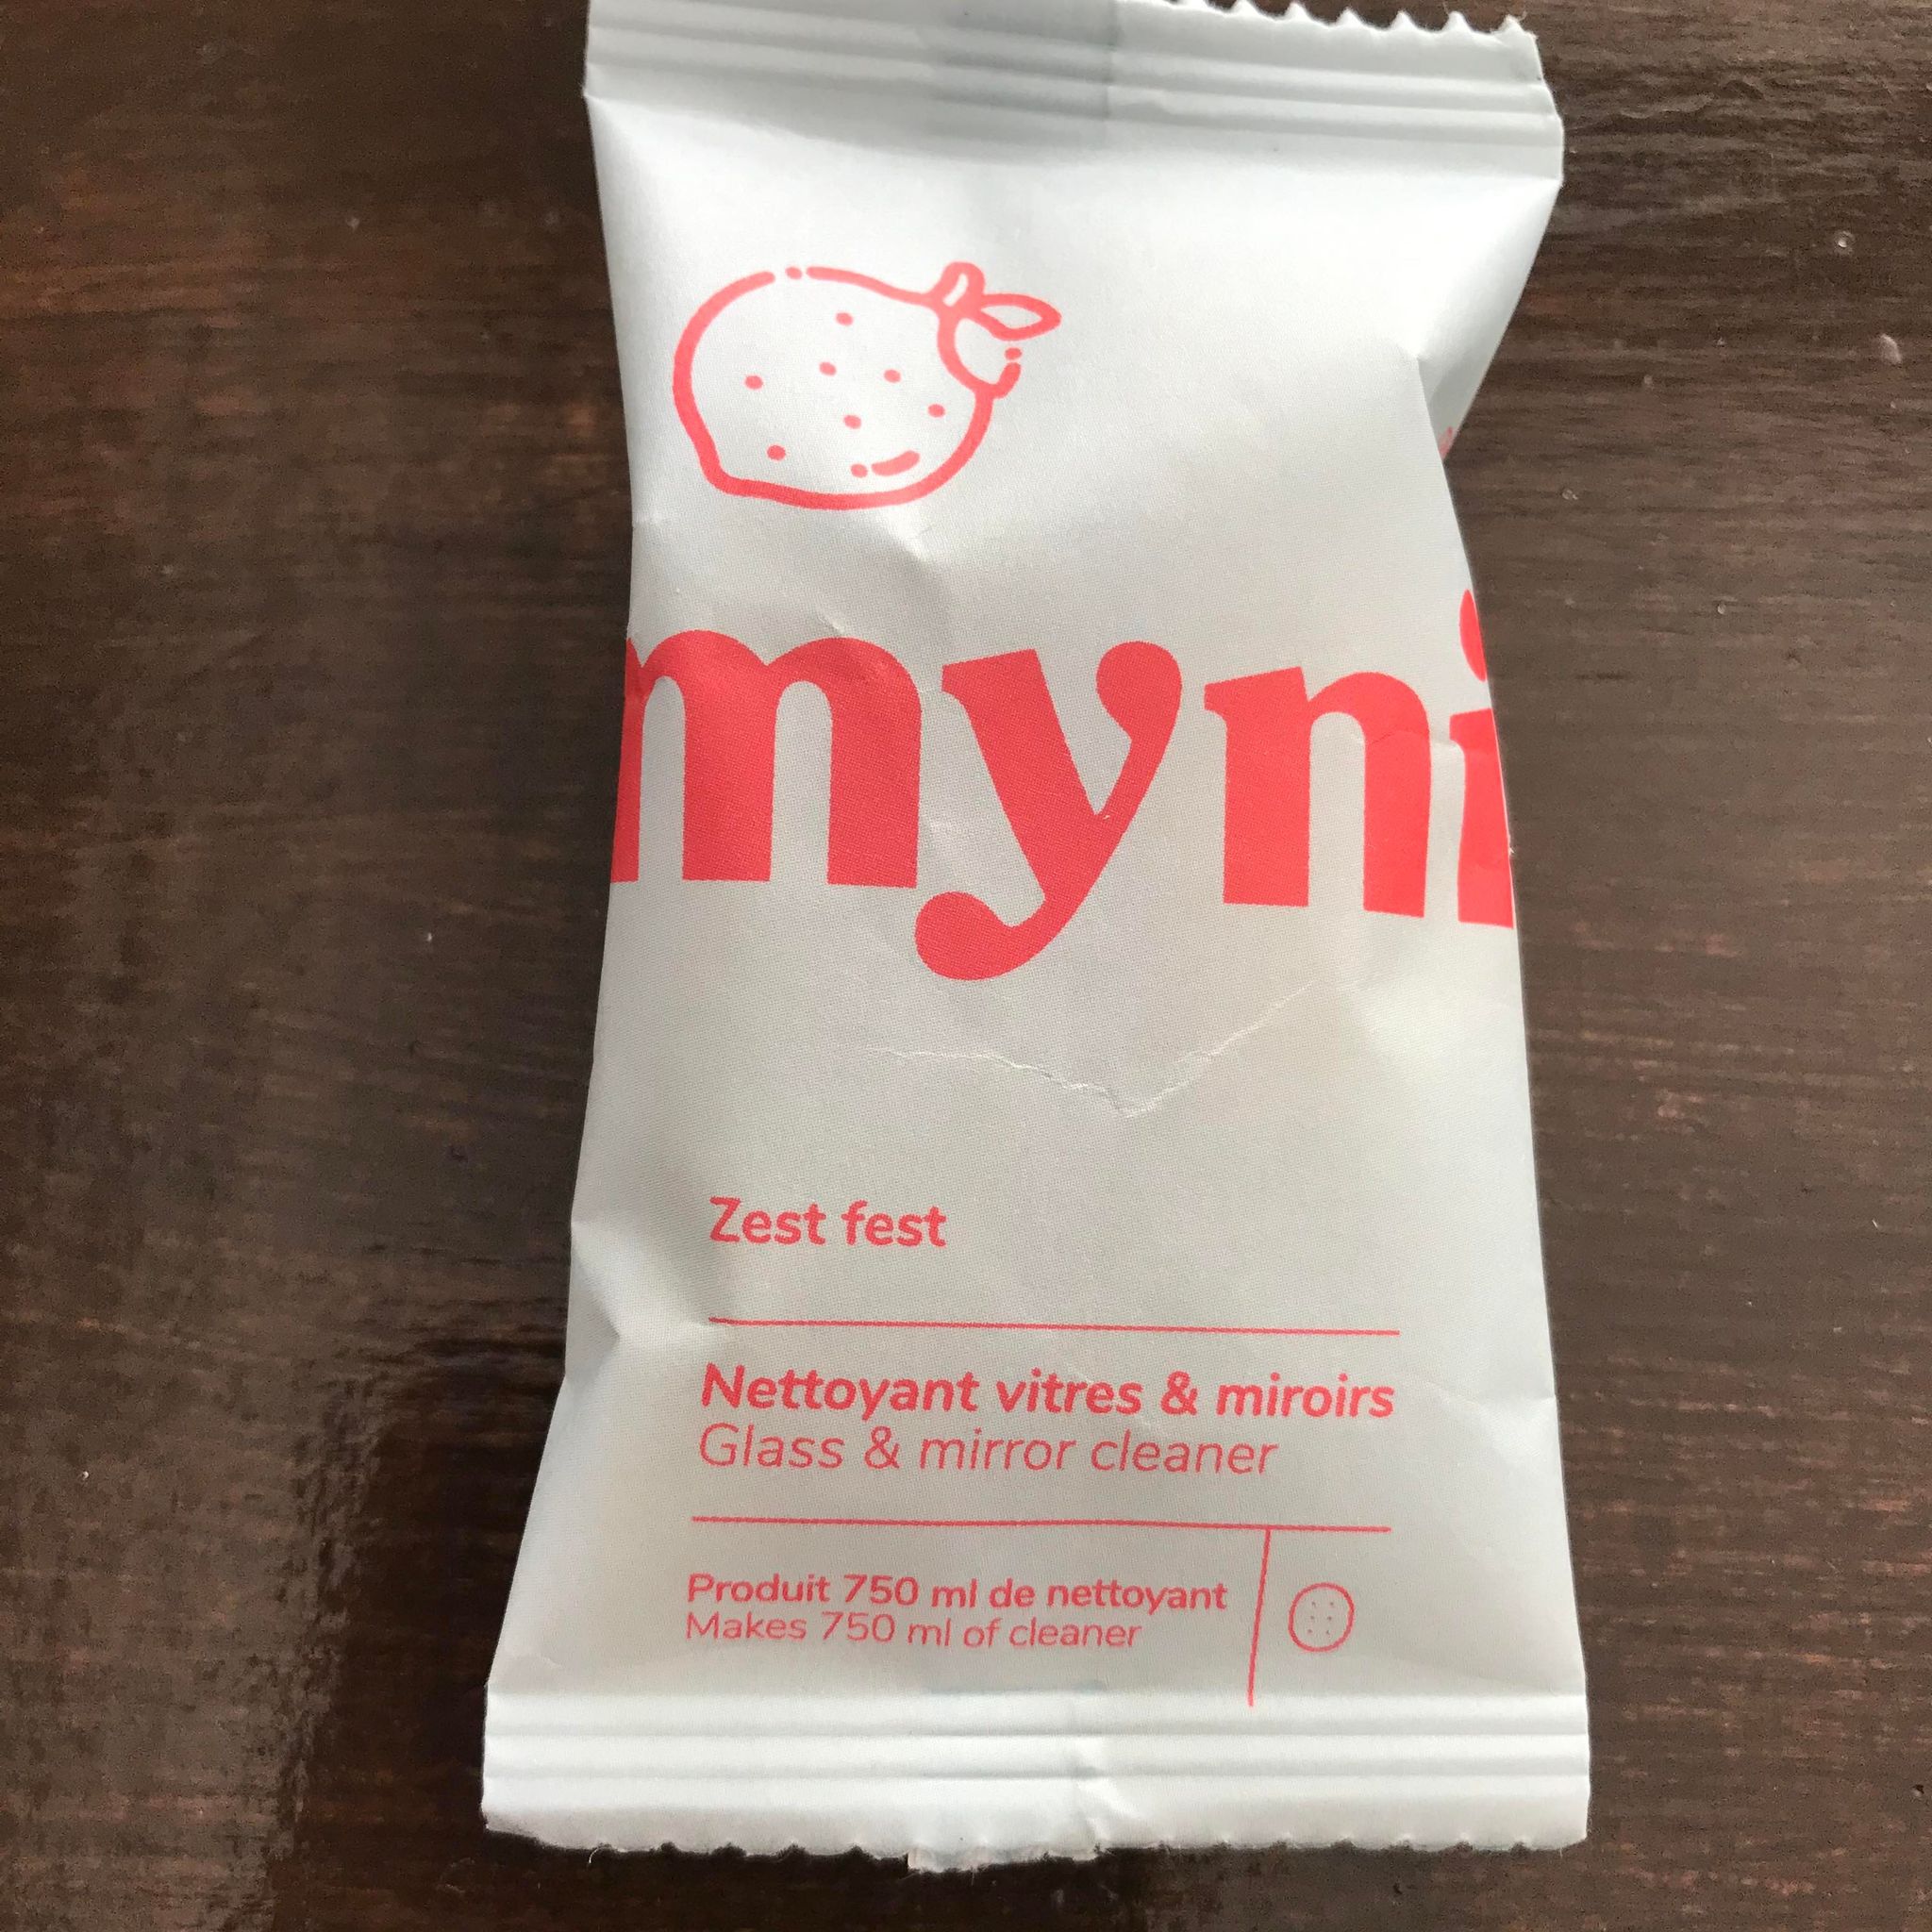 Zest Fest lemon mint scented glass and mirror cleaner cleaning tablet concentrate in a compostable pouch made in canada by myni